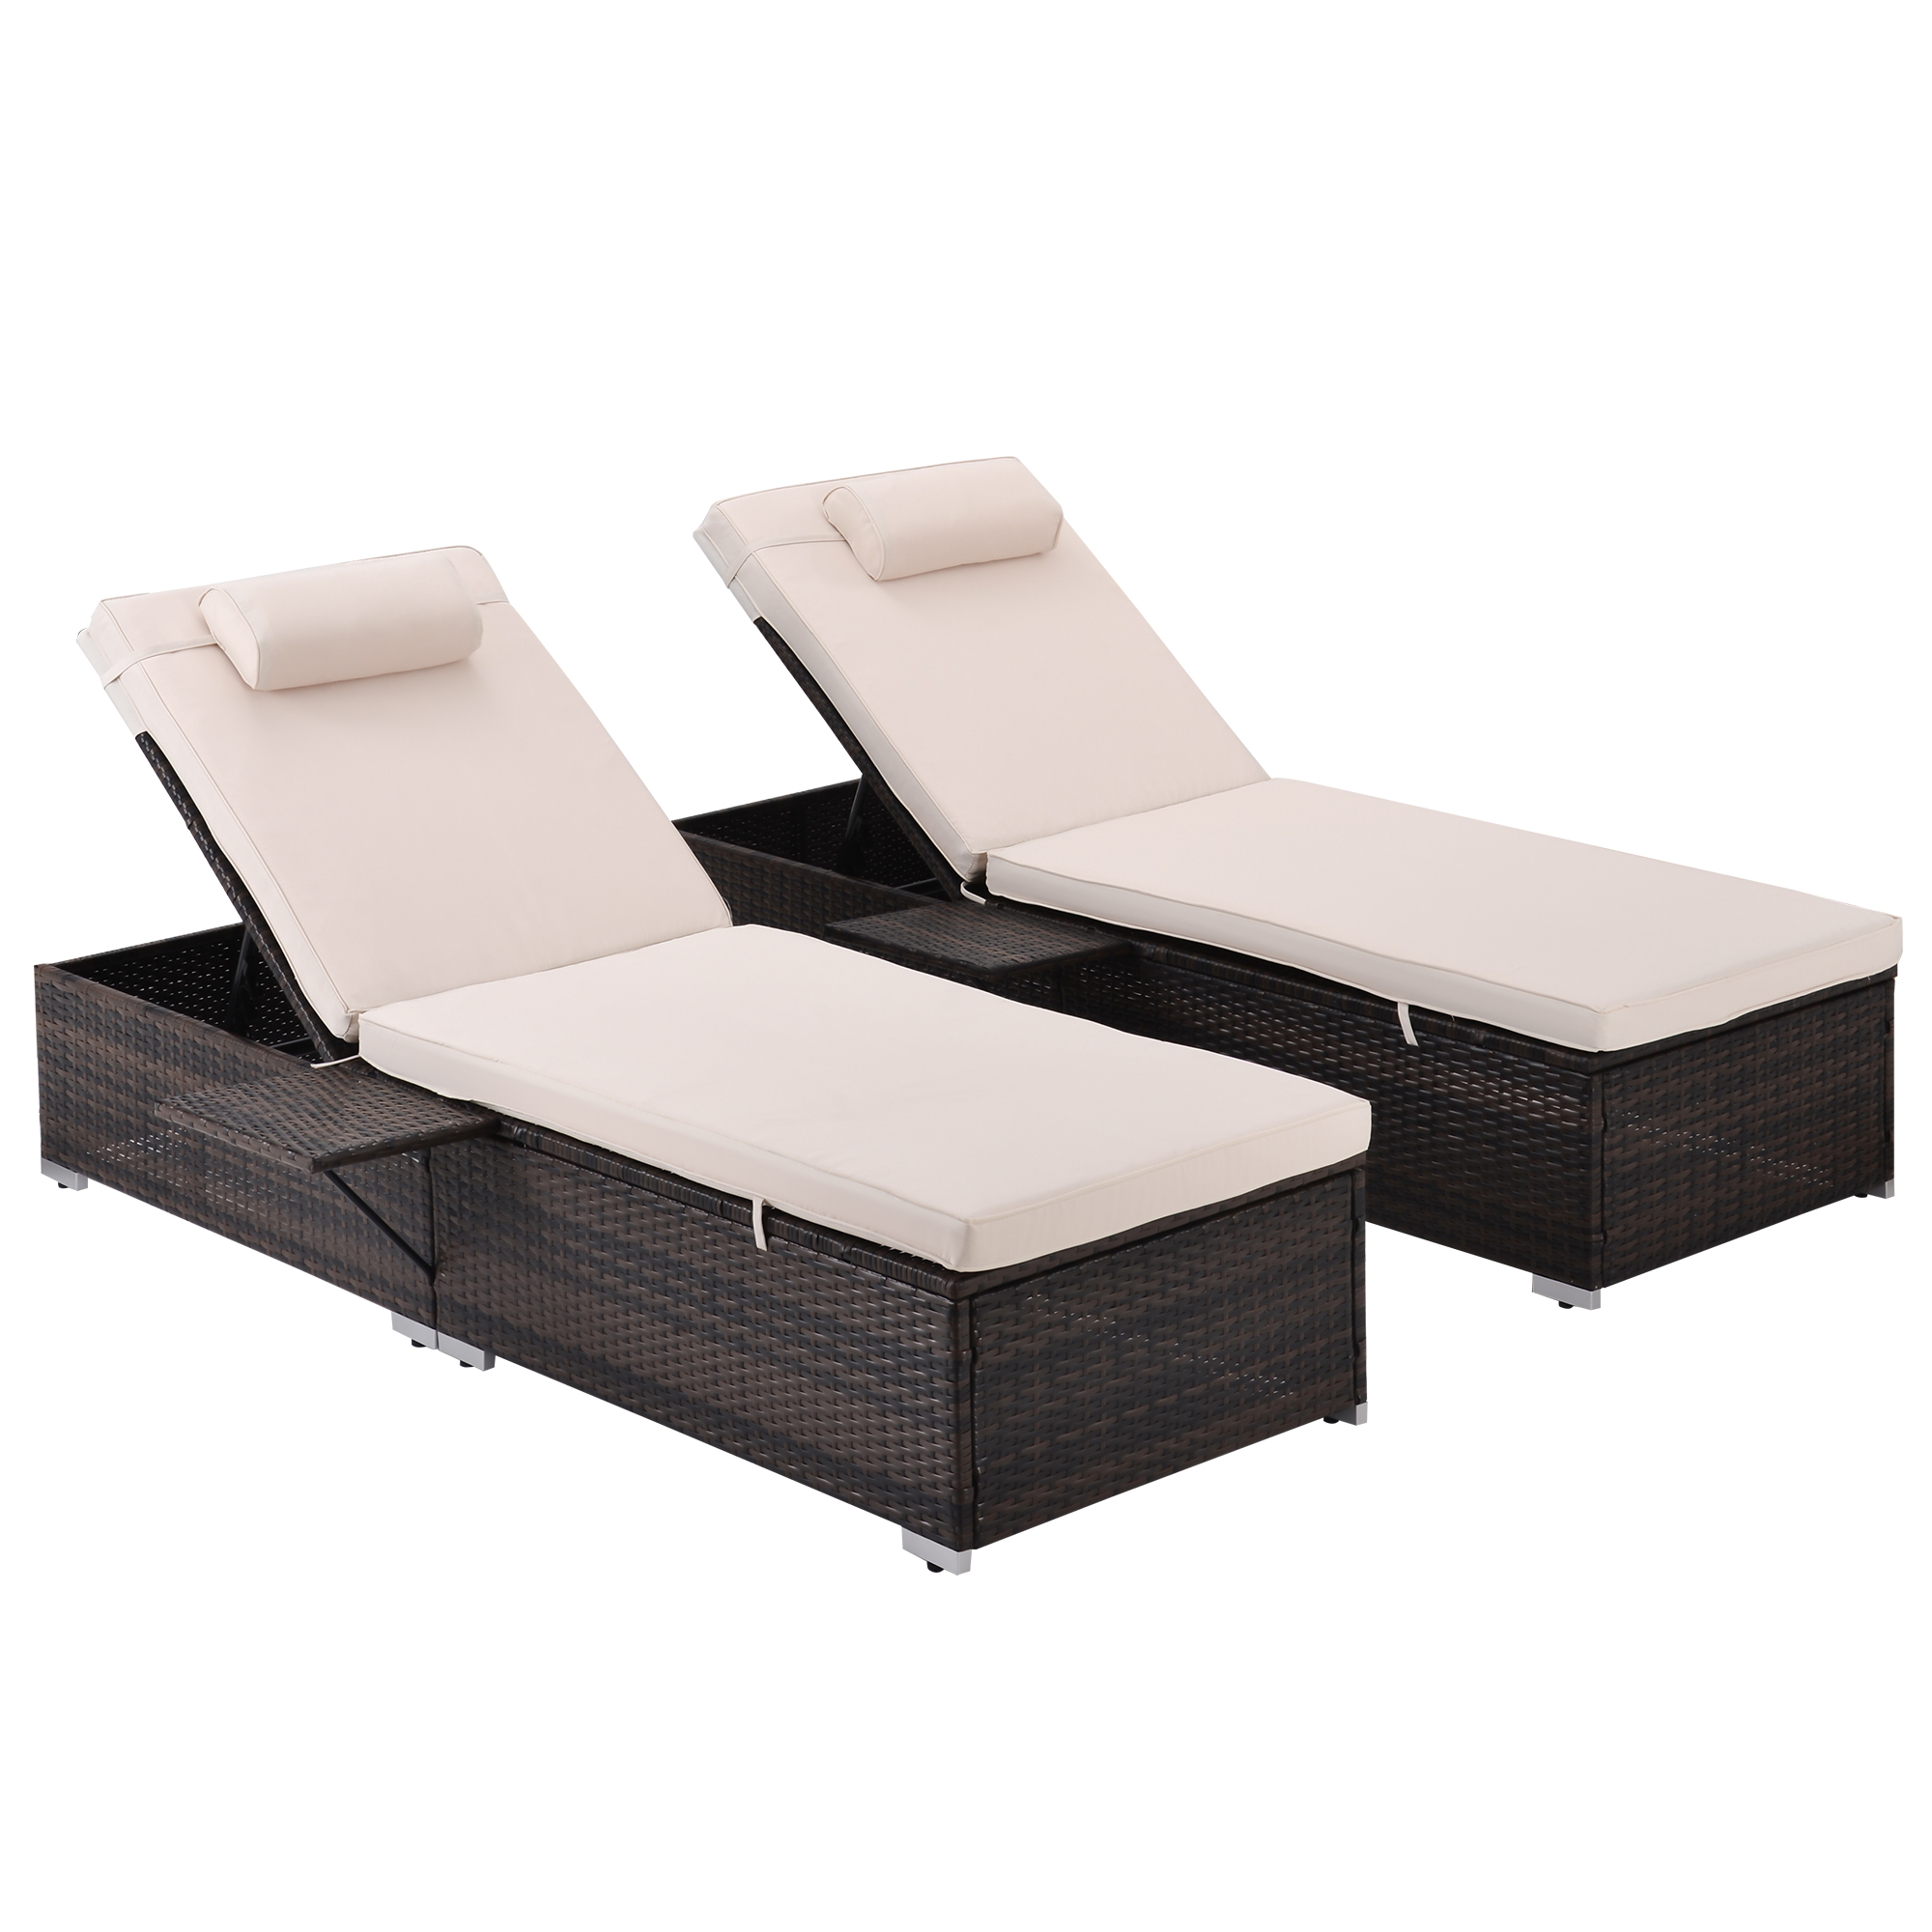 Outdoor Wicker Rattan Chaise Lounge,2 Pieces Patio Brown Rattan Reclining Chair Set,Adjustable Backrest Recliners with Side Table and Comfort Head Pillow for Garden Patio Balcony Beach Coffee Bar - image 3 of 7